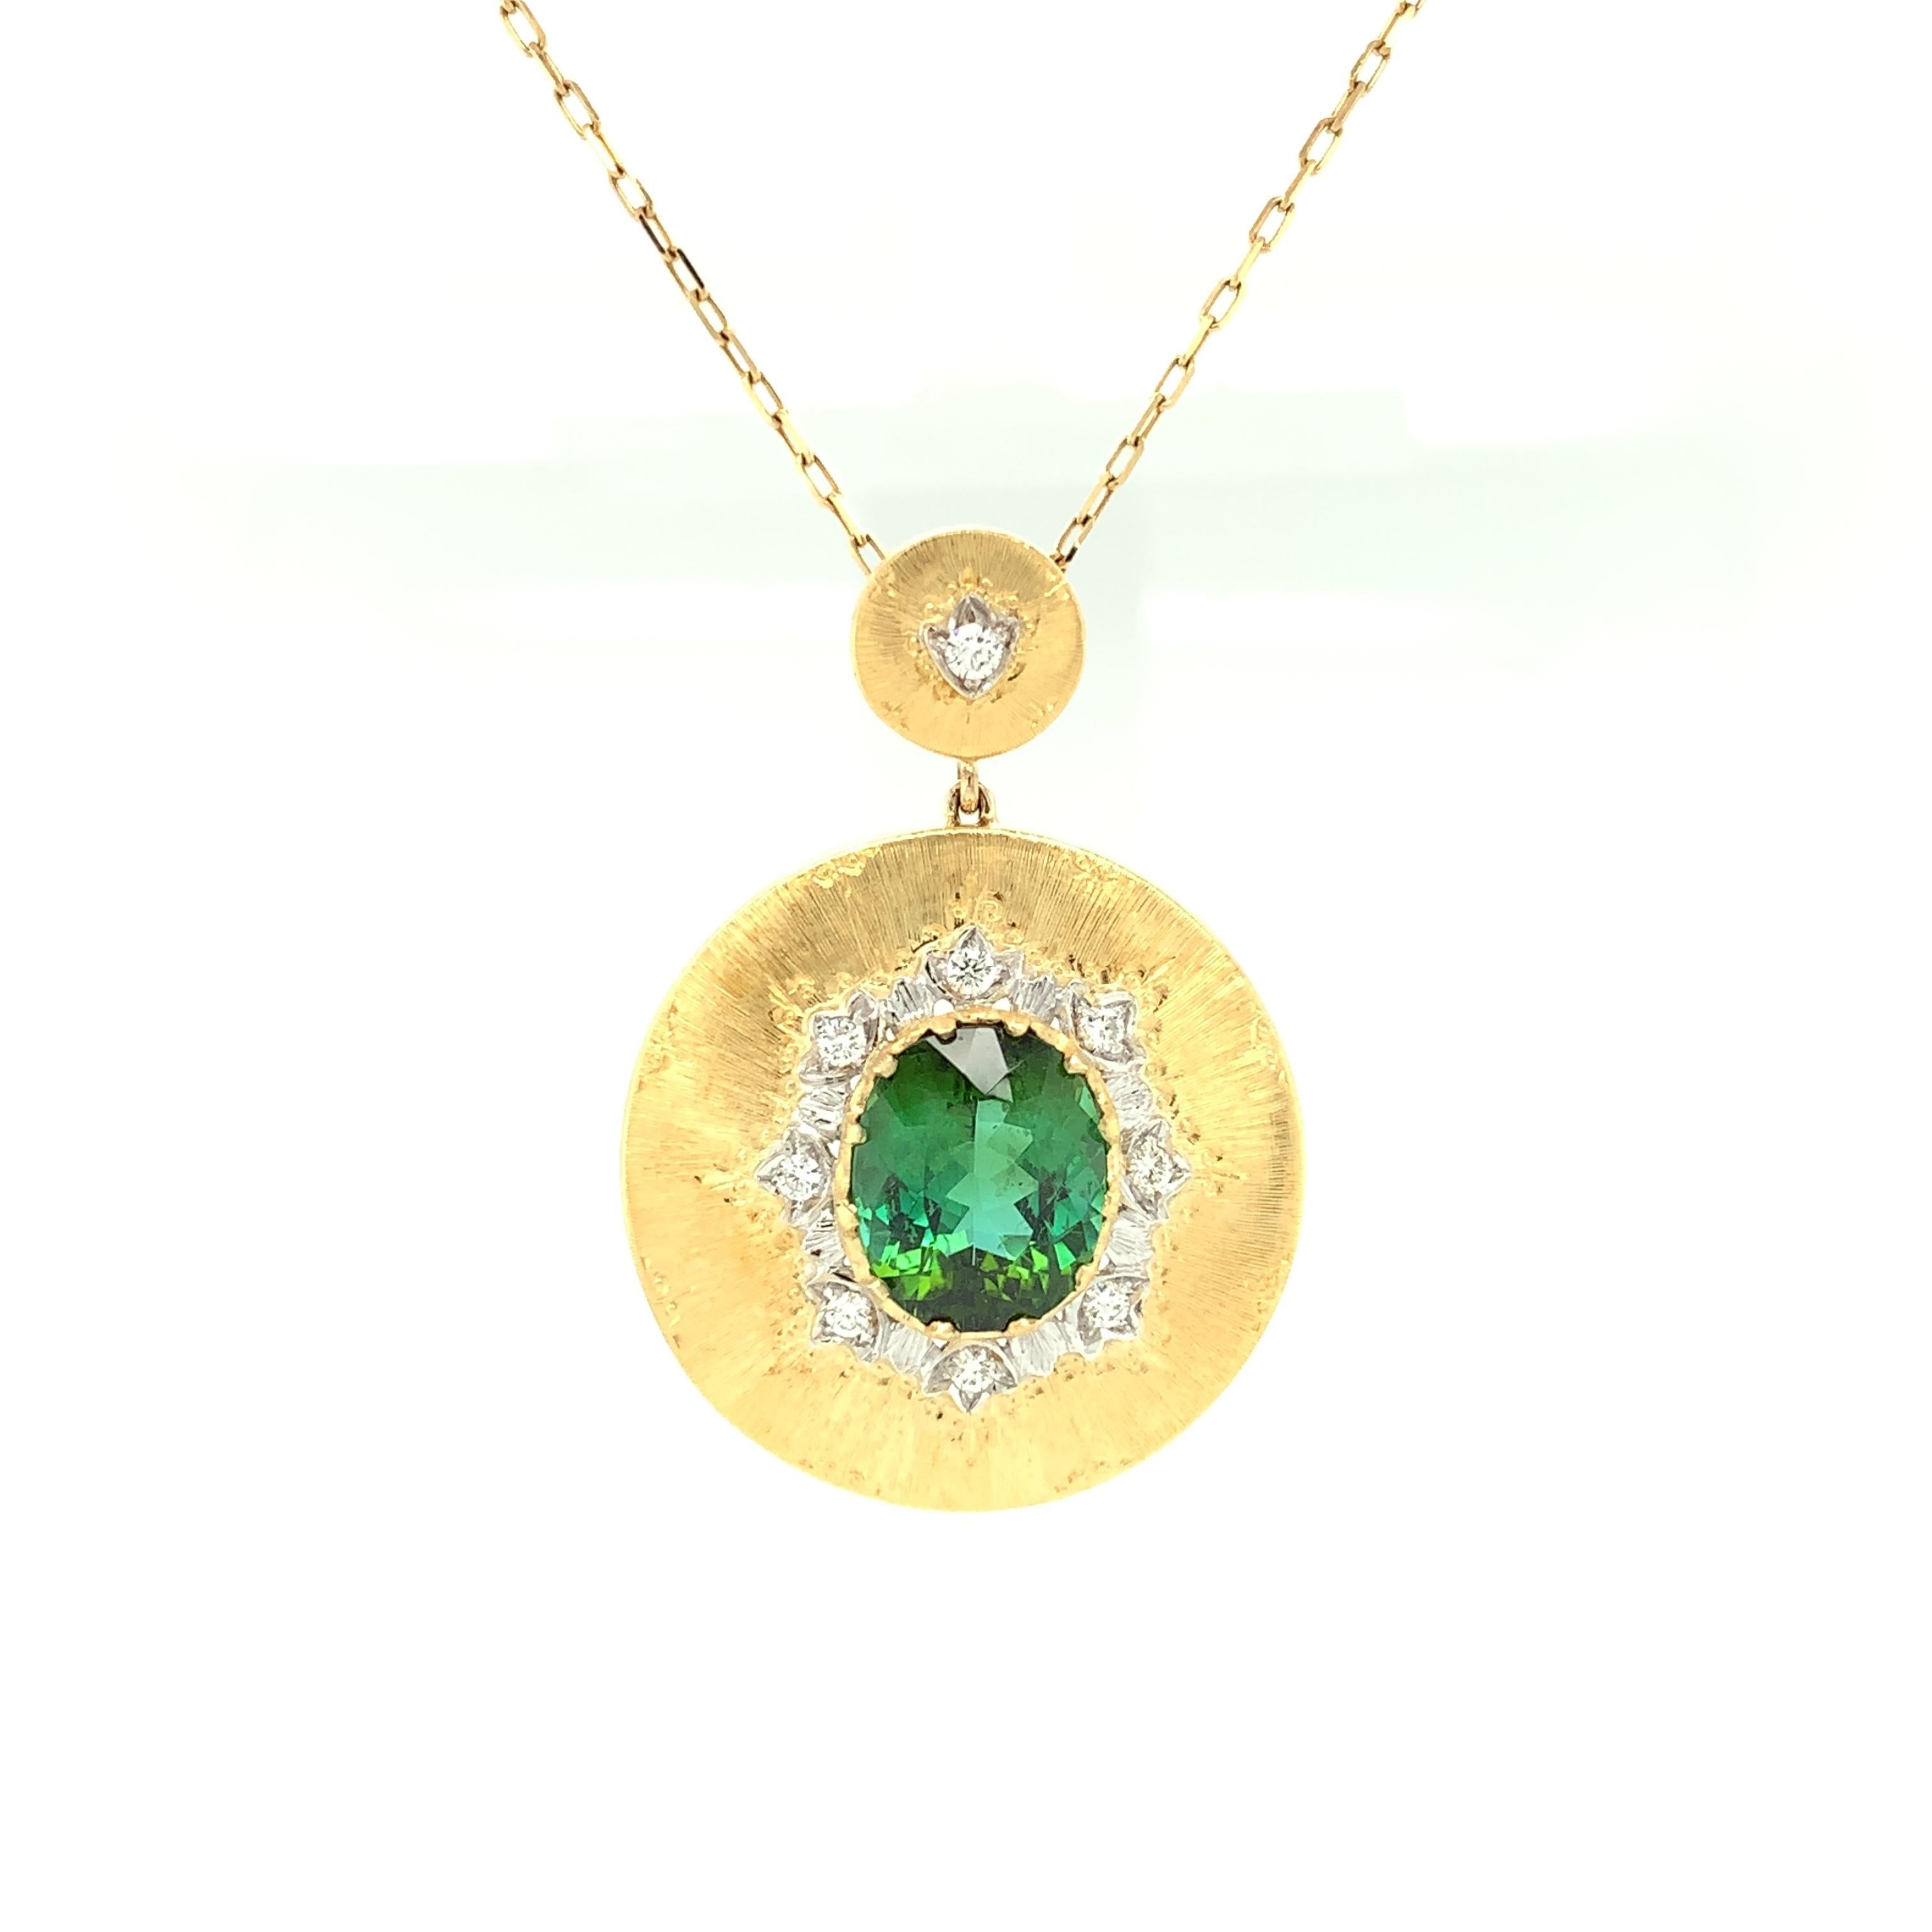 This Florentine style pendant was handmade in Italy and features a 5.79 carat beautiful, deep bluish green tourmaline framed by round brilliant cut white diamonds. The luxurious design and expert craftsmanship of this 18k yellow and white gold